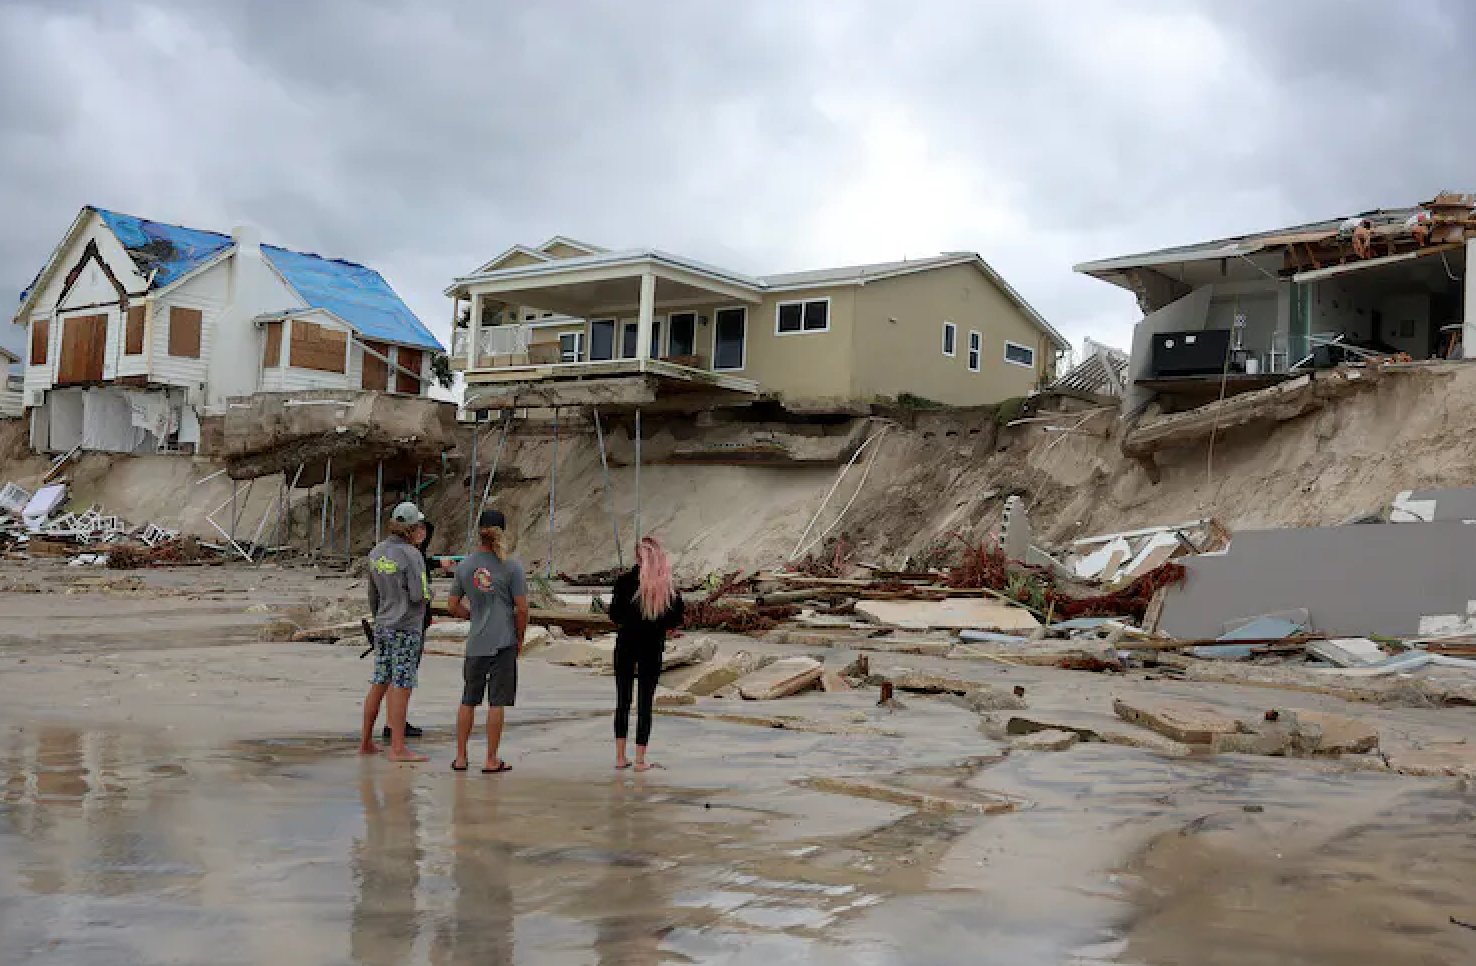 After Hurricane Nicole's erosion, dozens of homes were left unstable in the Daytona Beach area.